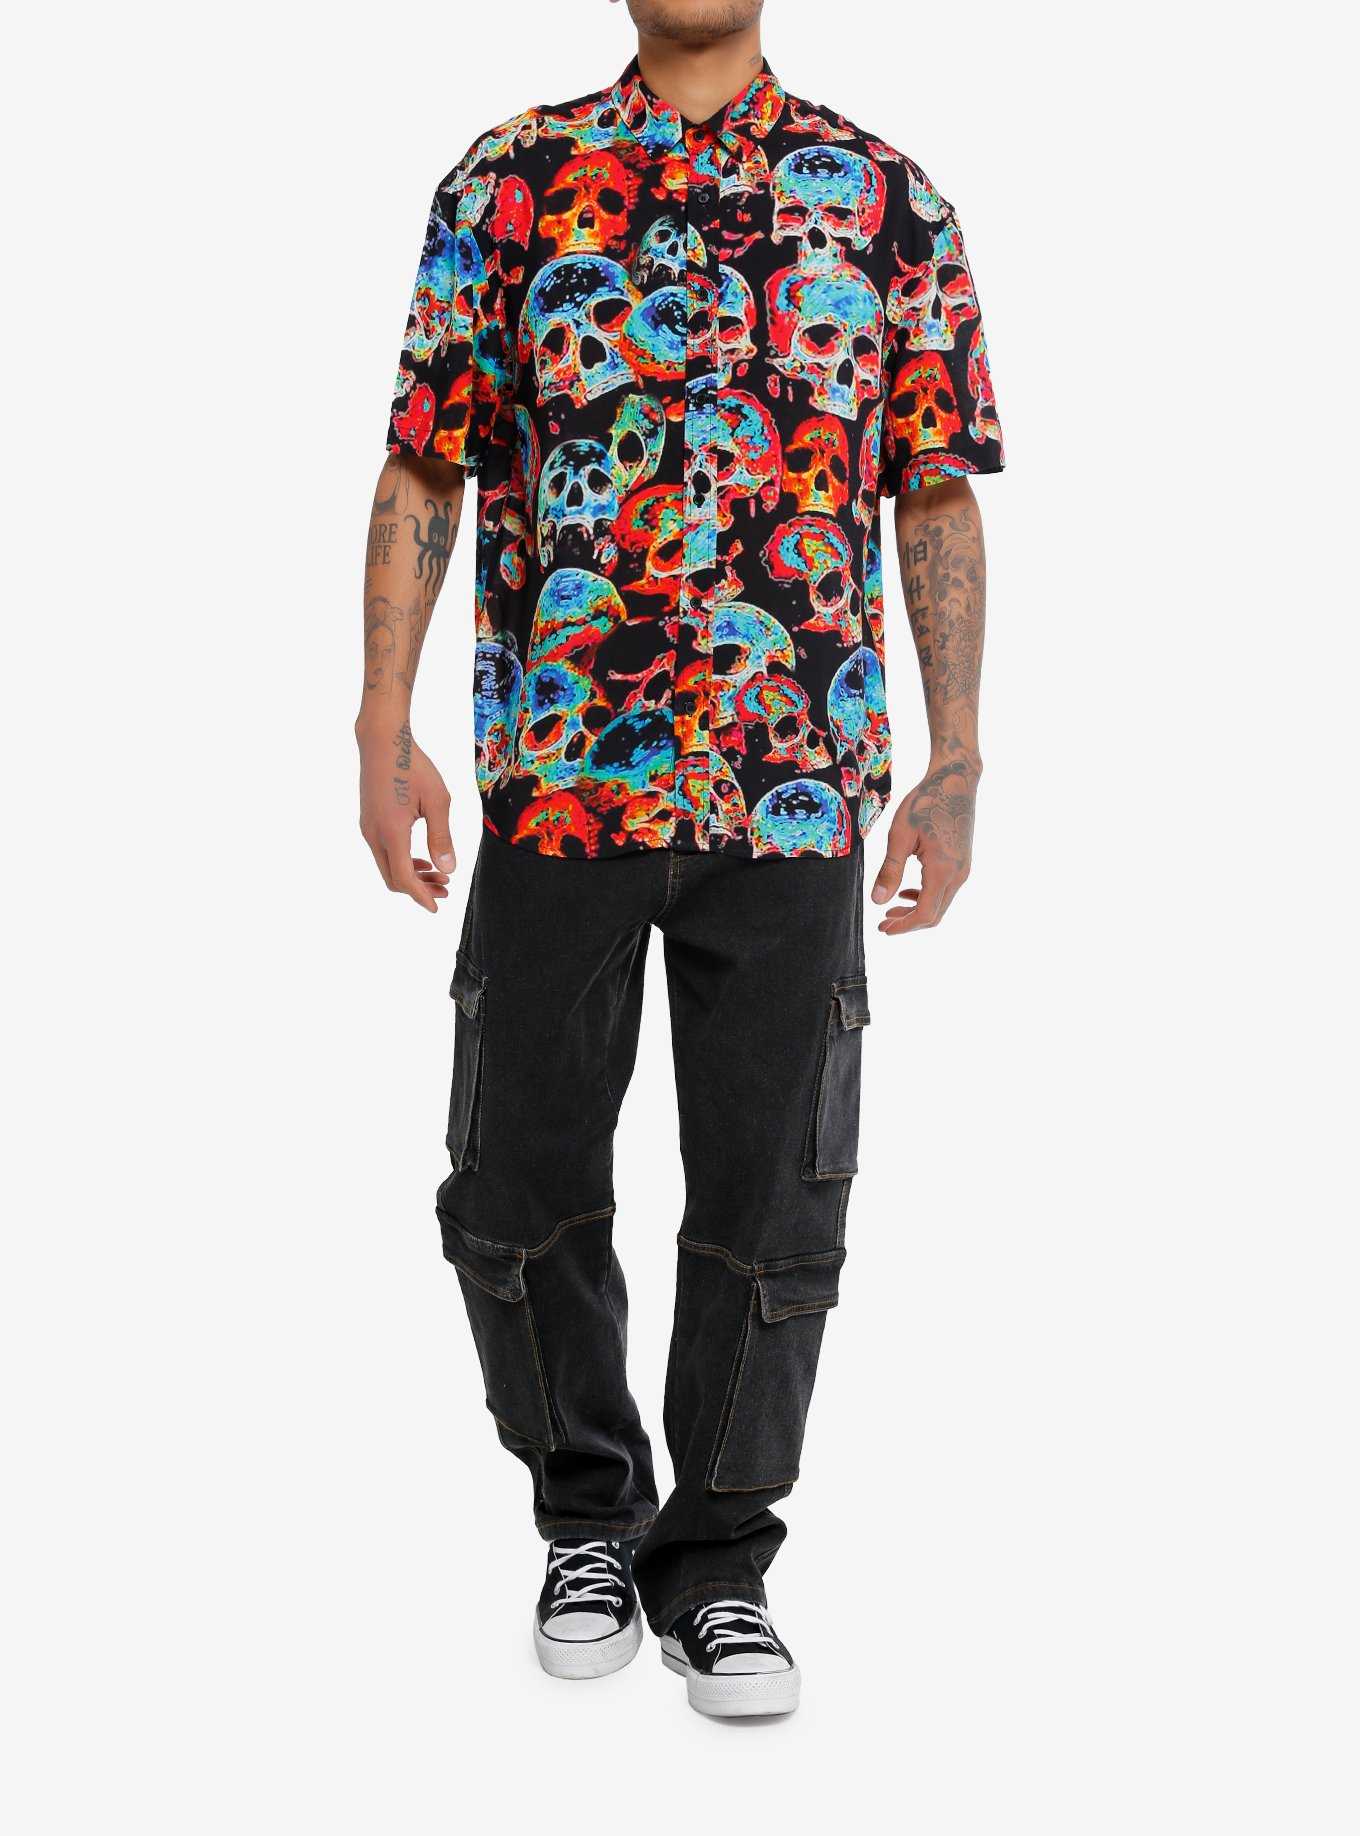 Infrared Skulls Woven Button-Up, , hi-res